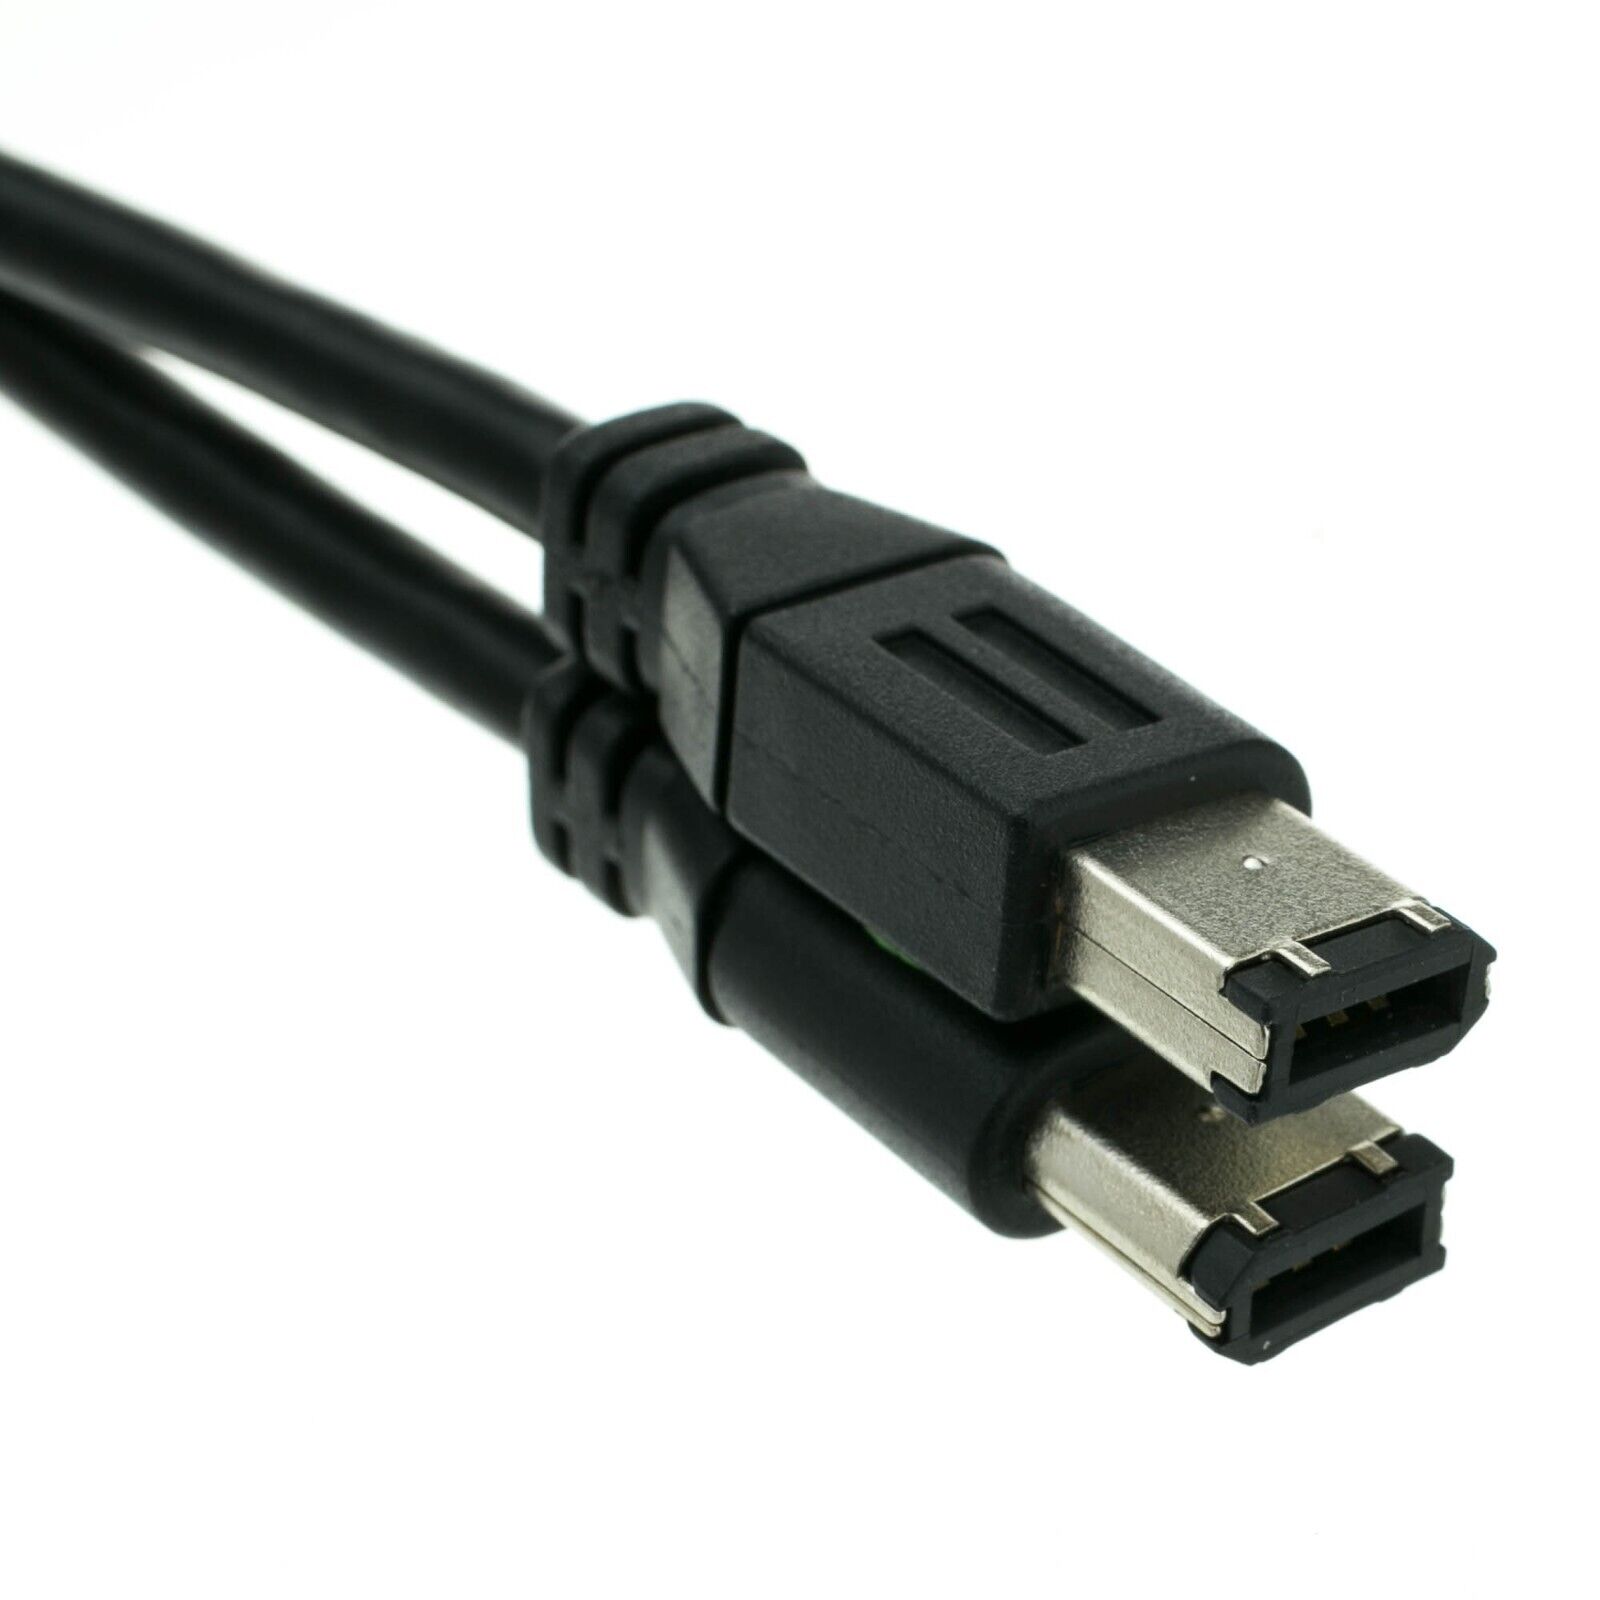 15FT  Firewire 400 6 Pin TO 6 Pin cable  IEEE-1394a Black 10E3-01115